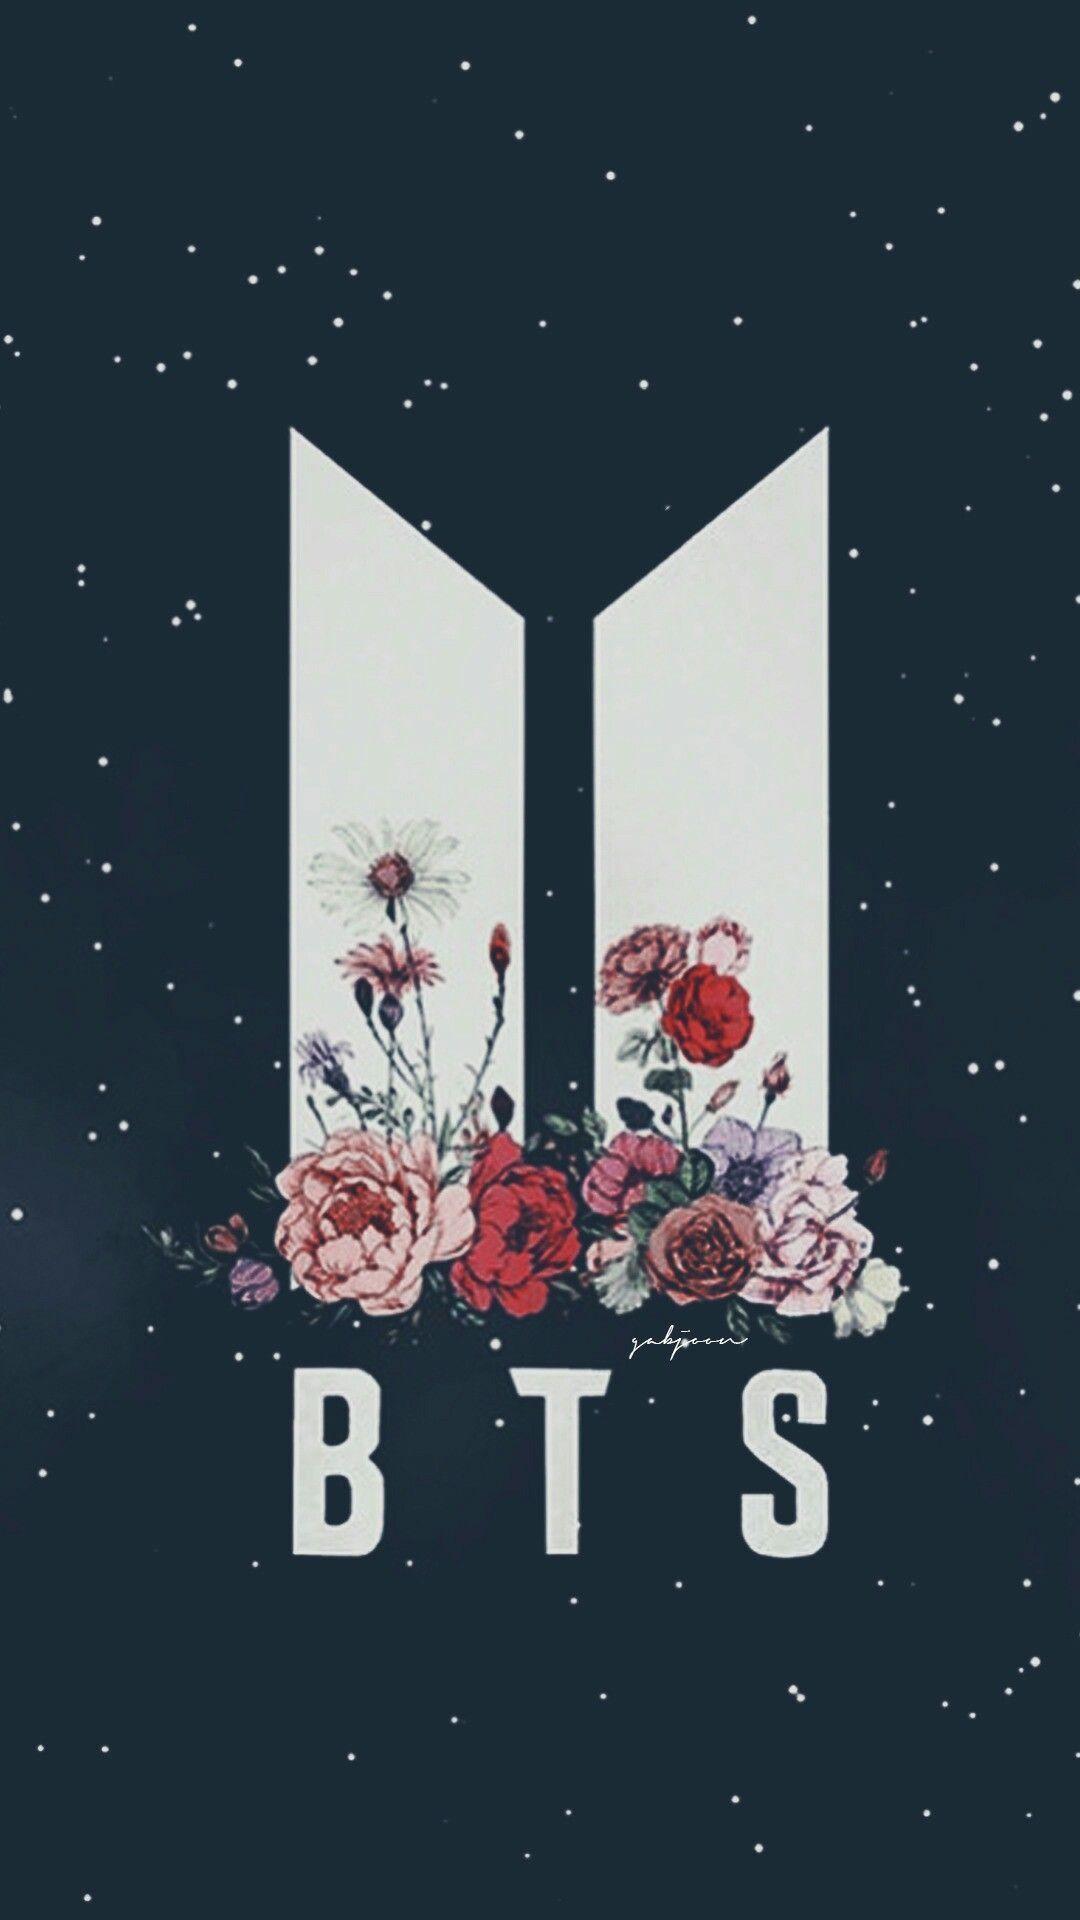 Bts And Army Logo Wallpapers Top Free Bts And Army Logo Backgrounds